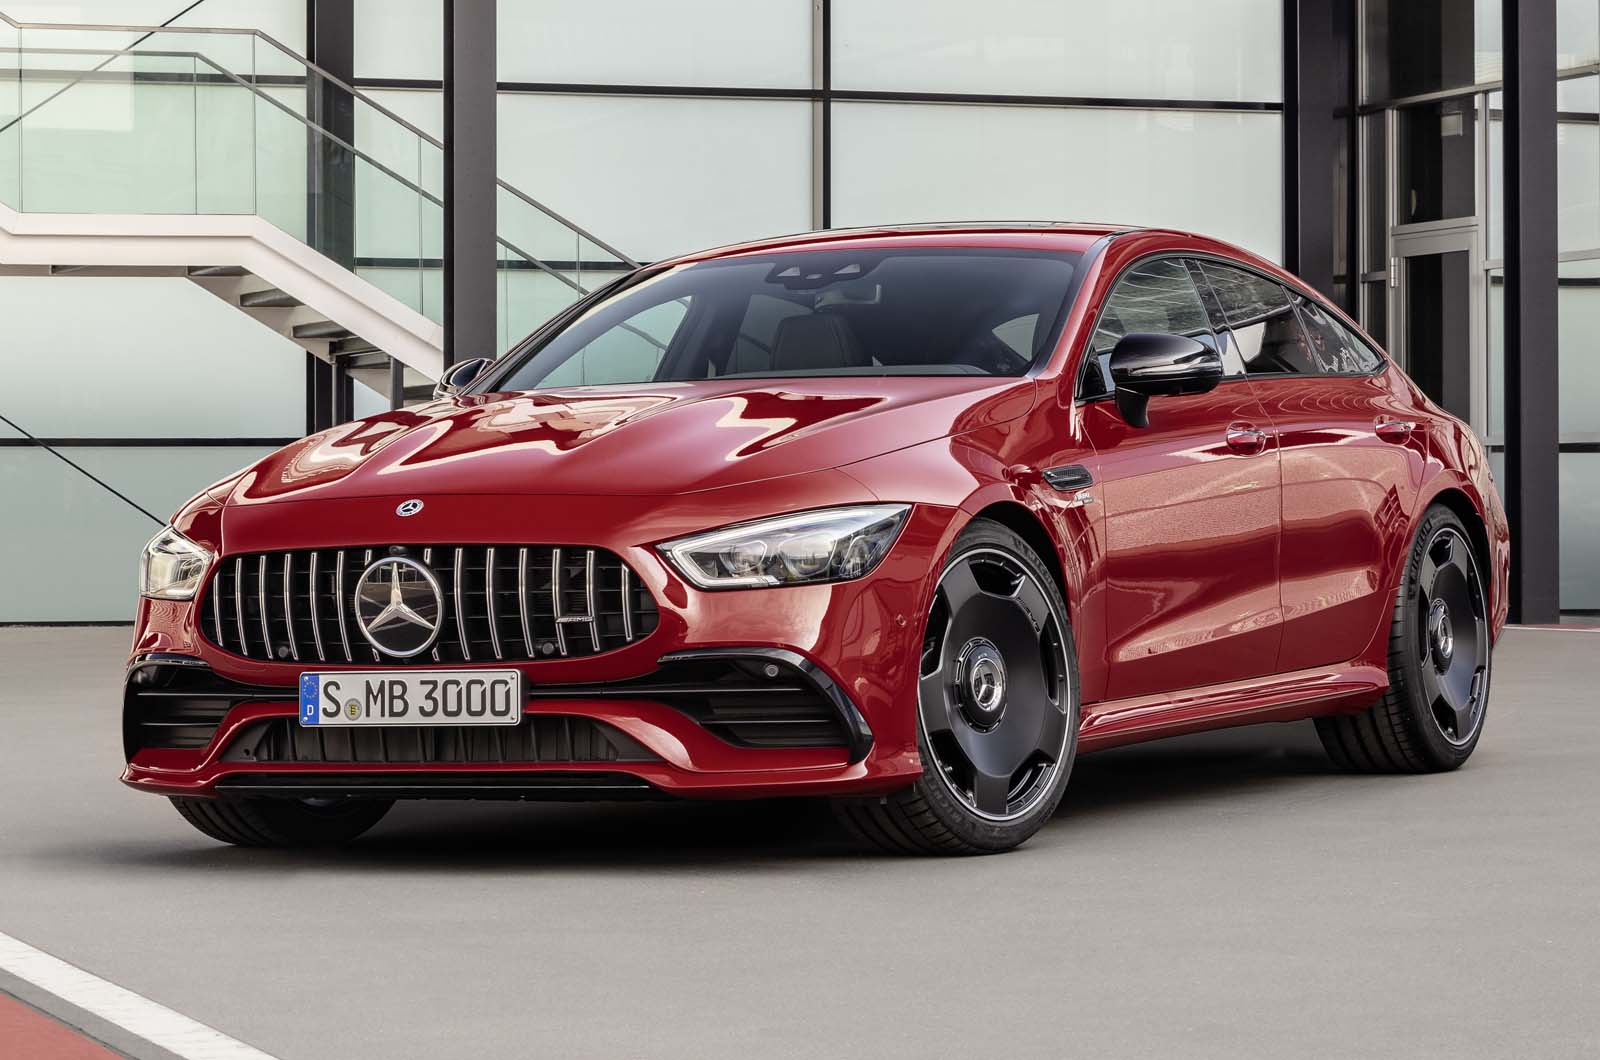 Mercedes Amg Gt 4 Door Coupe Priced From 121 350 Autocar